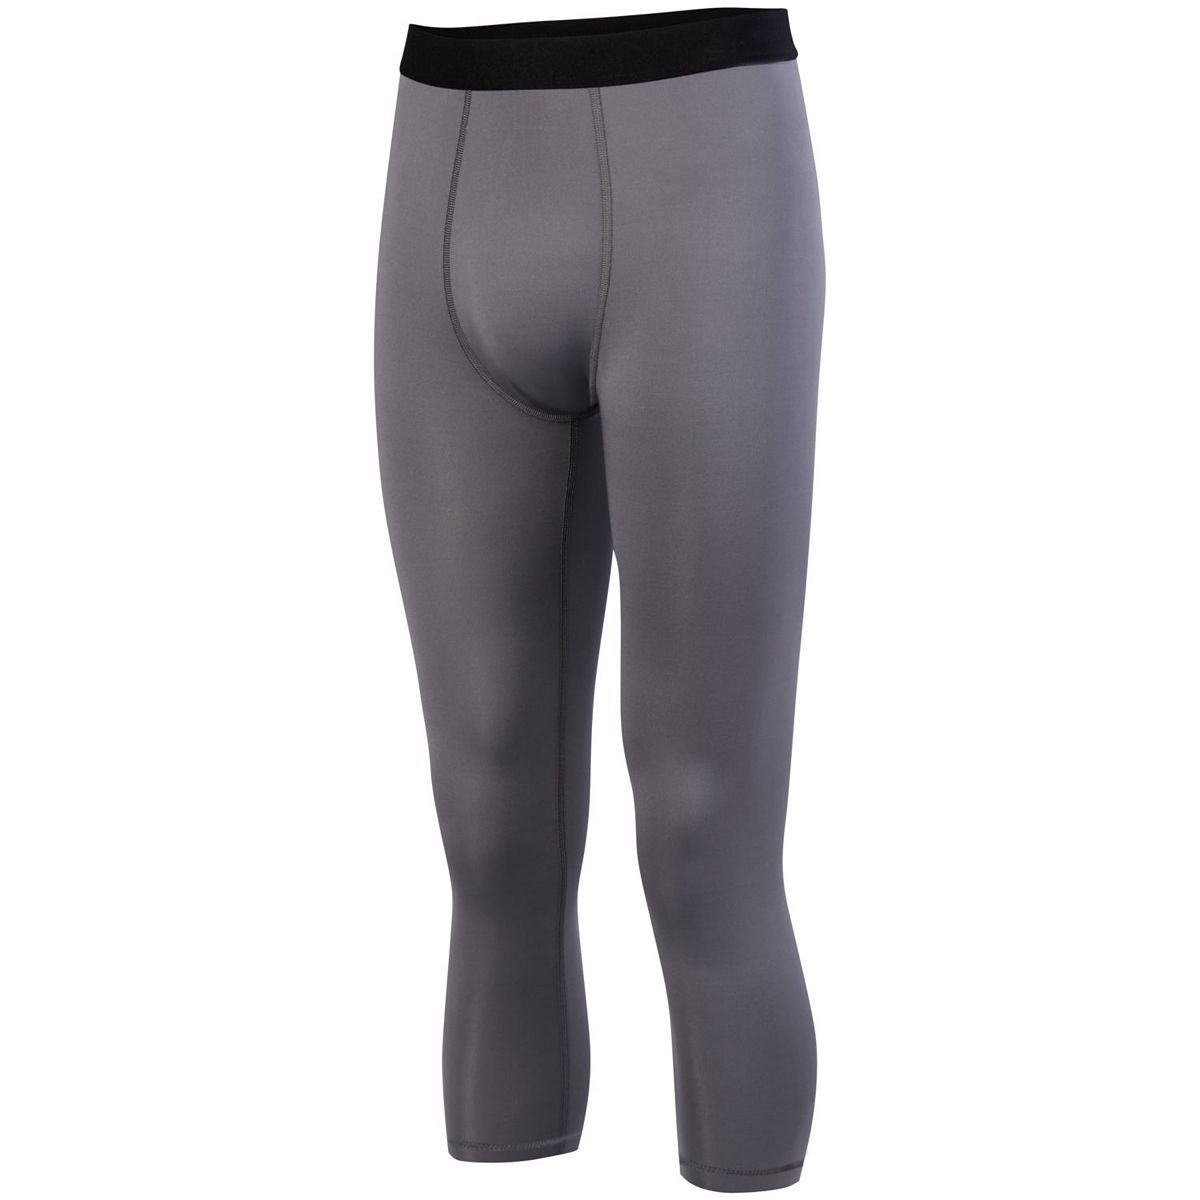 Youth Hyperform Compression Calf-Length Tight - 2619